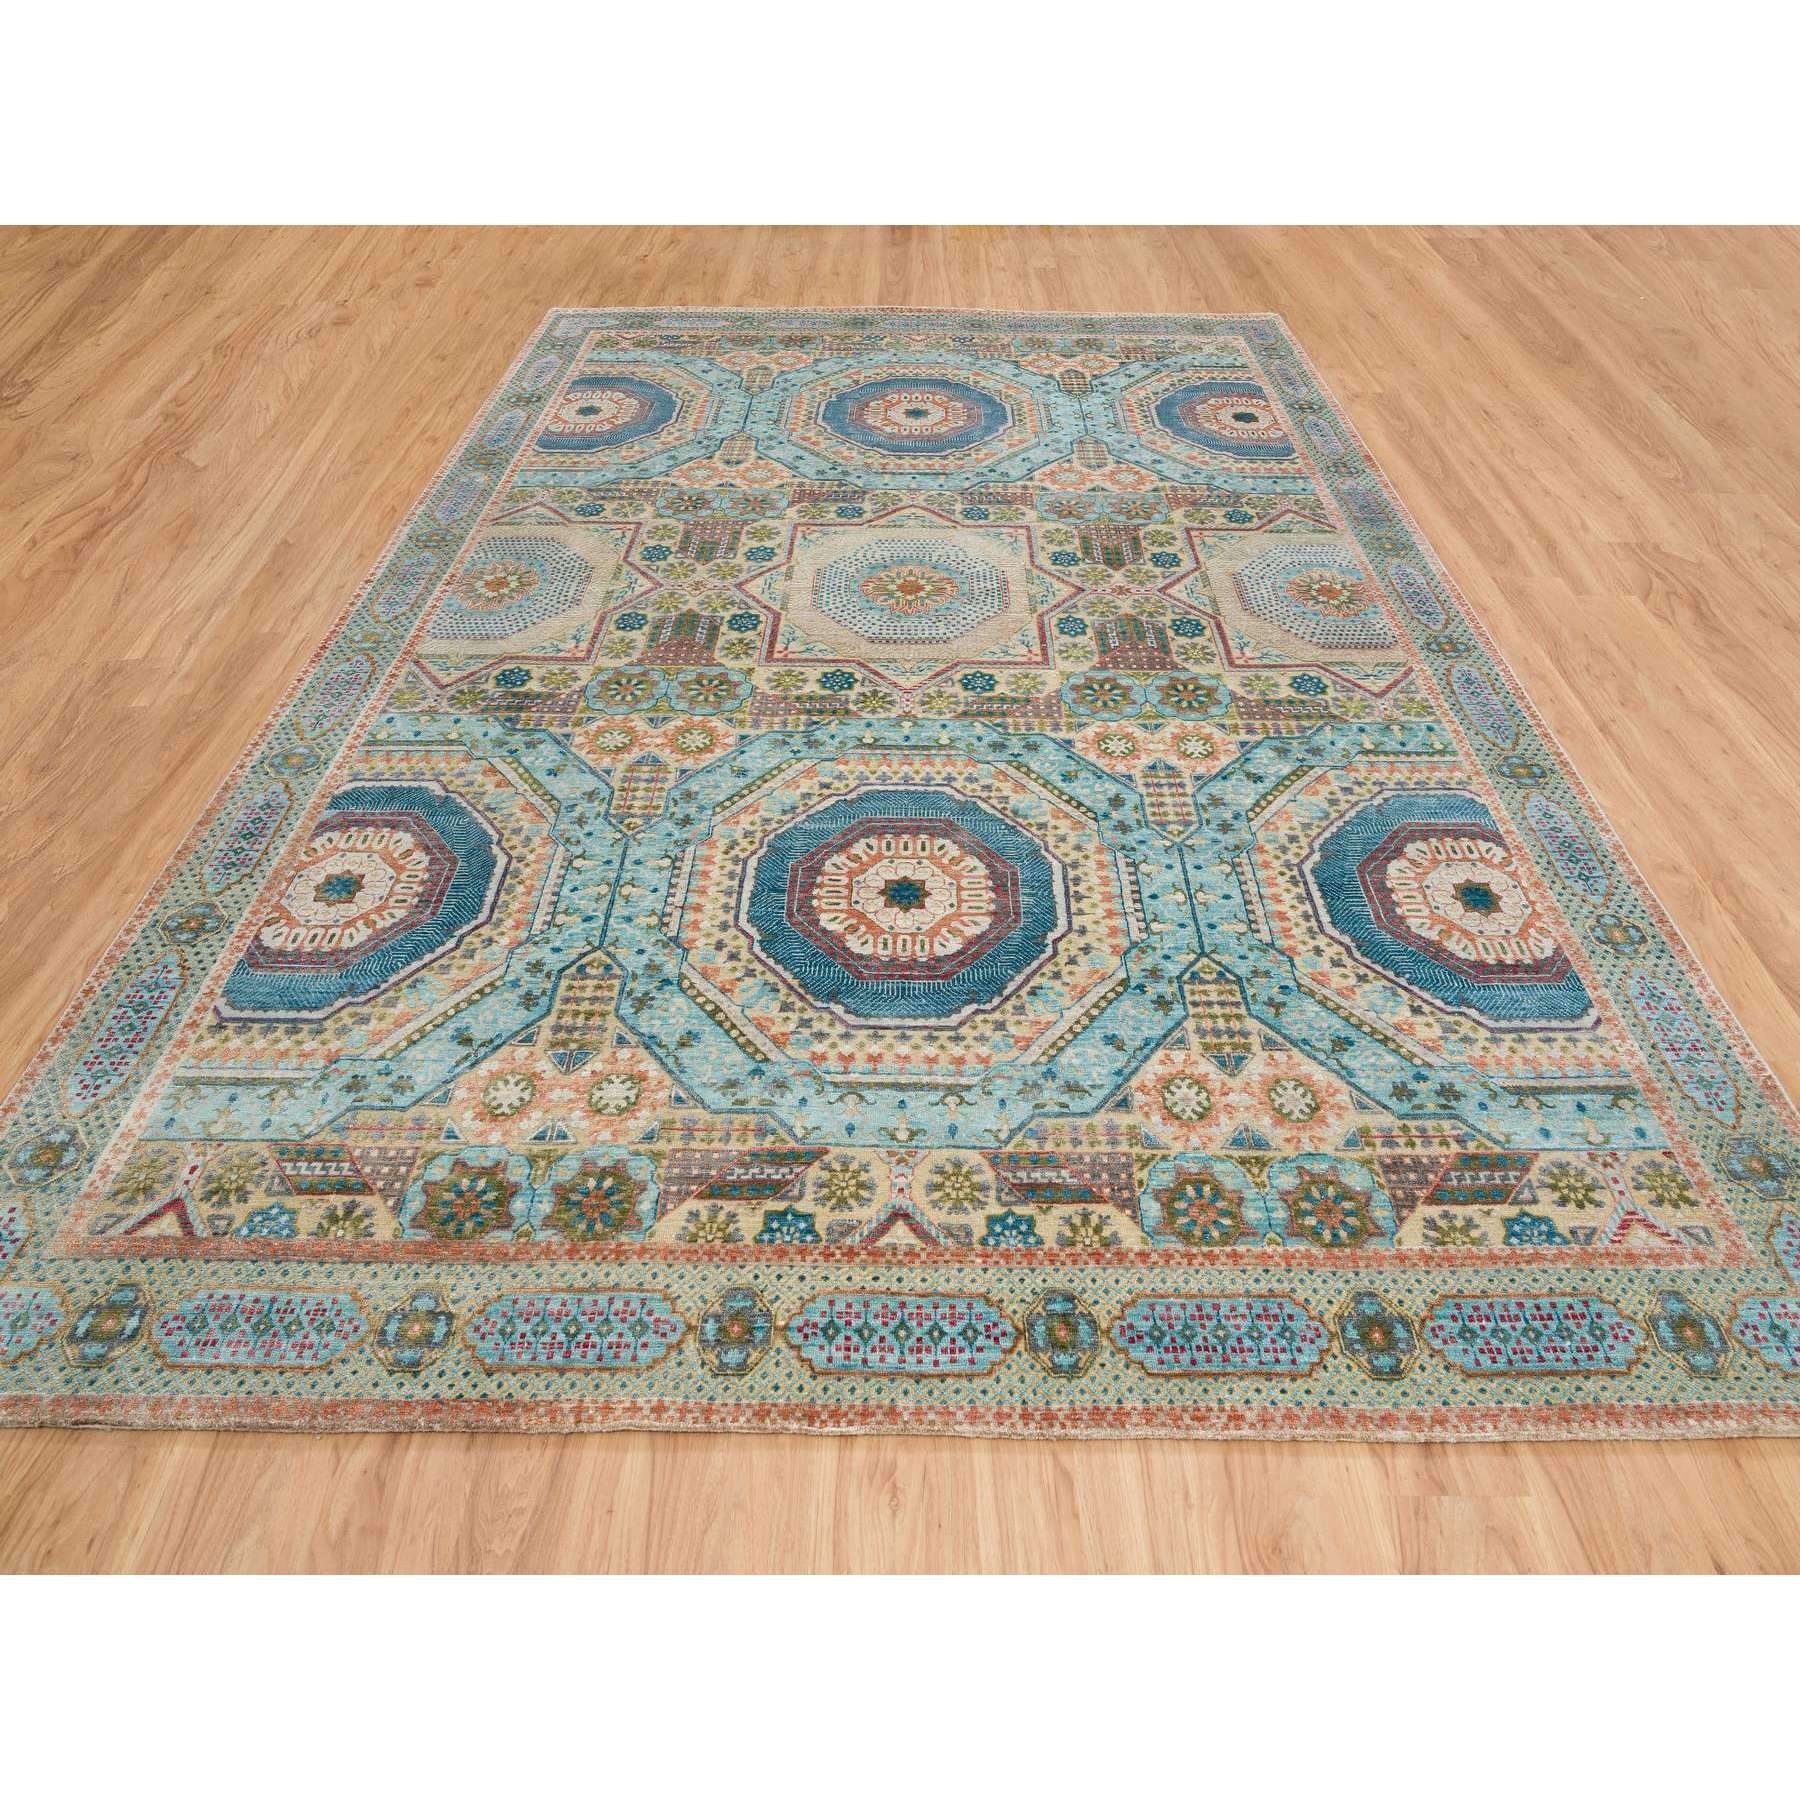 9'9"x14' Colorful, Hand Woven Mamluk Design with Geometric Medallions, Textured Wool and Silk, Oriental Rug 